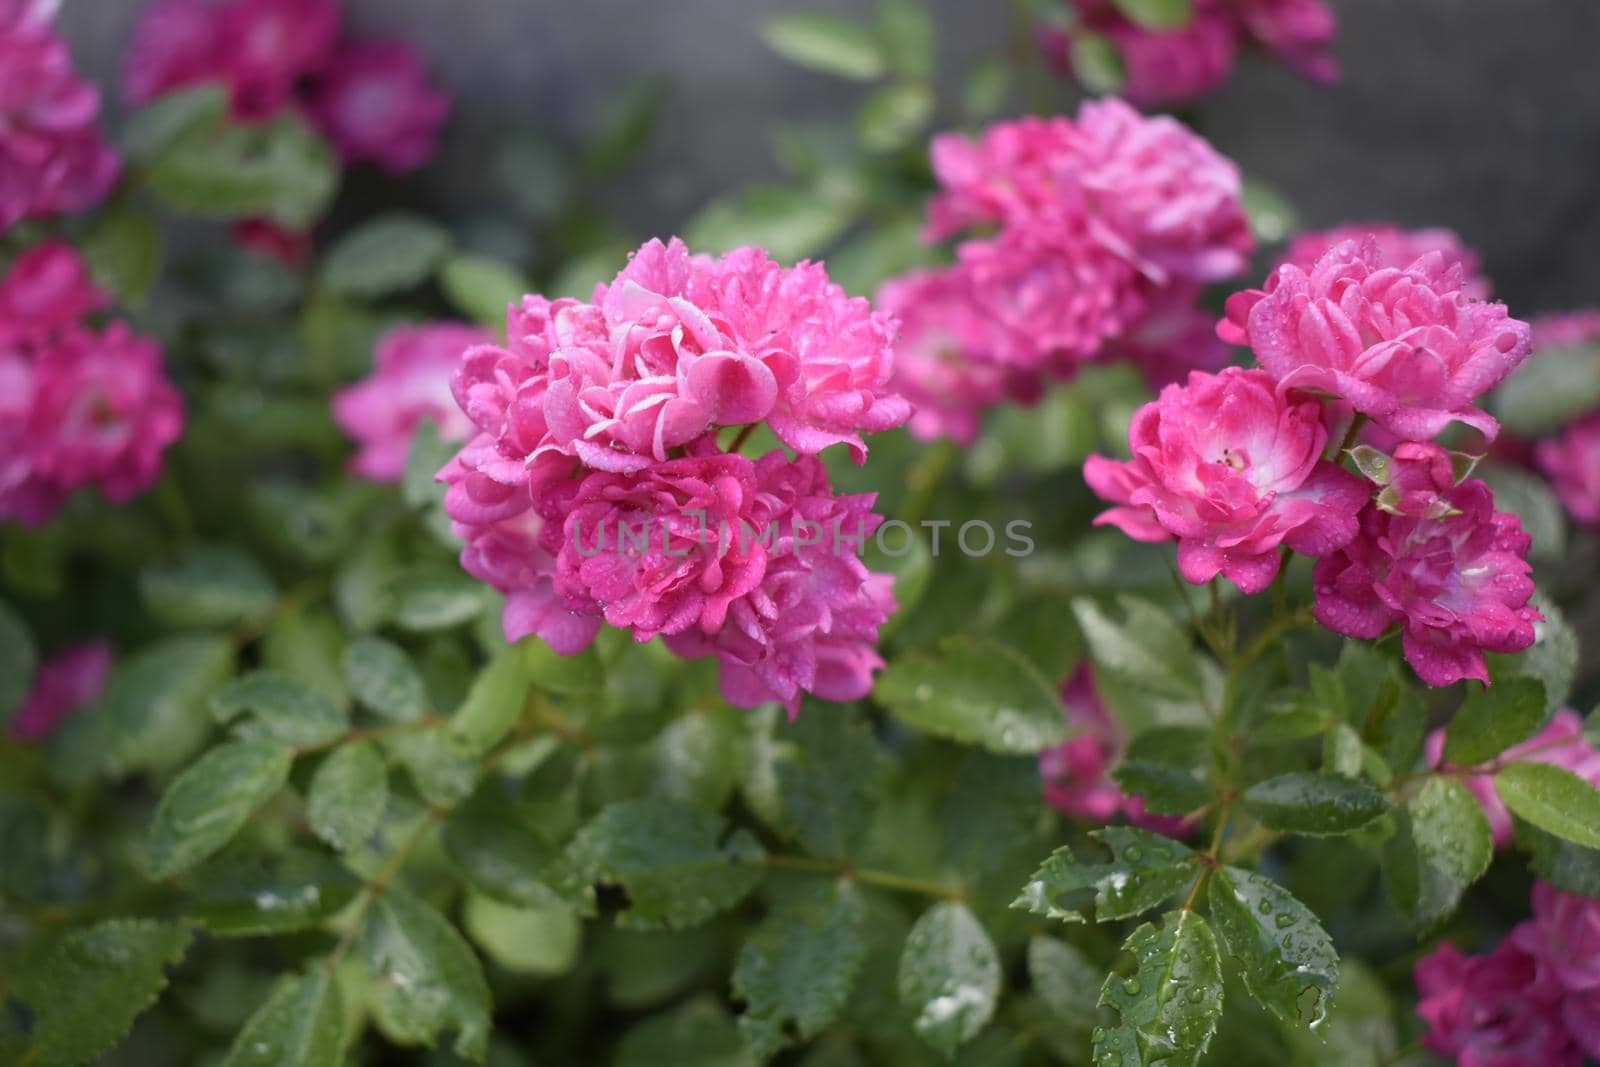 Wet pink roses with drops of dew. Outdoor background by NatalyArt